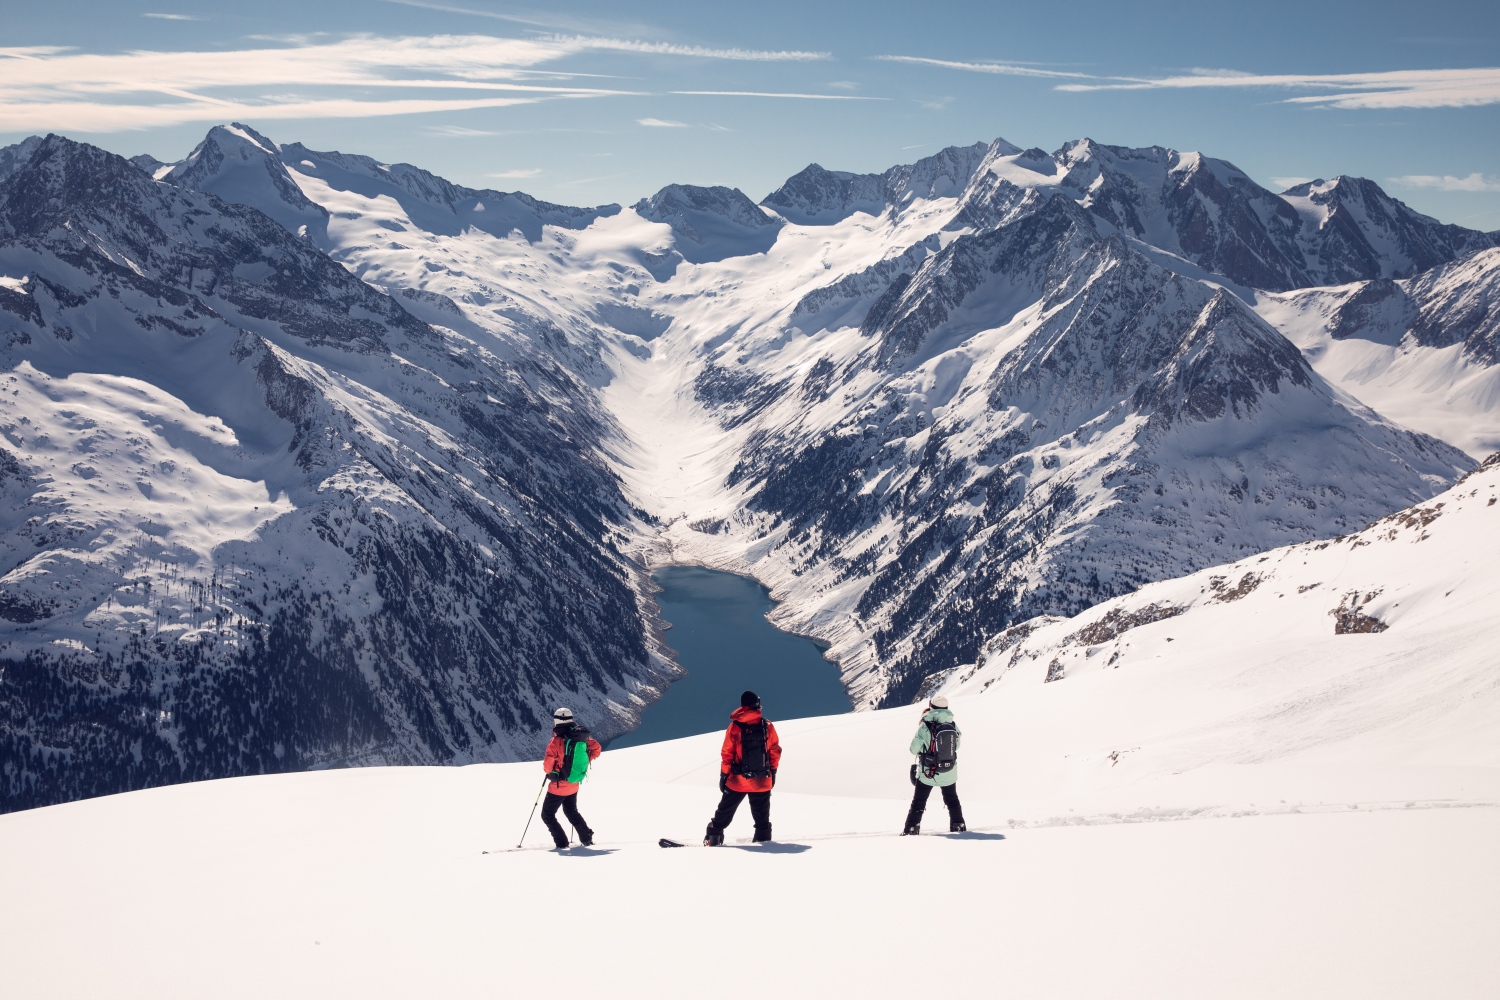 Skiers looking out over mountain landscape